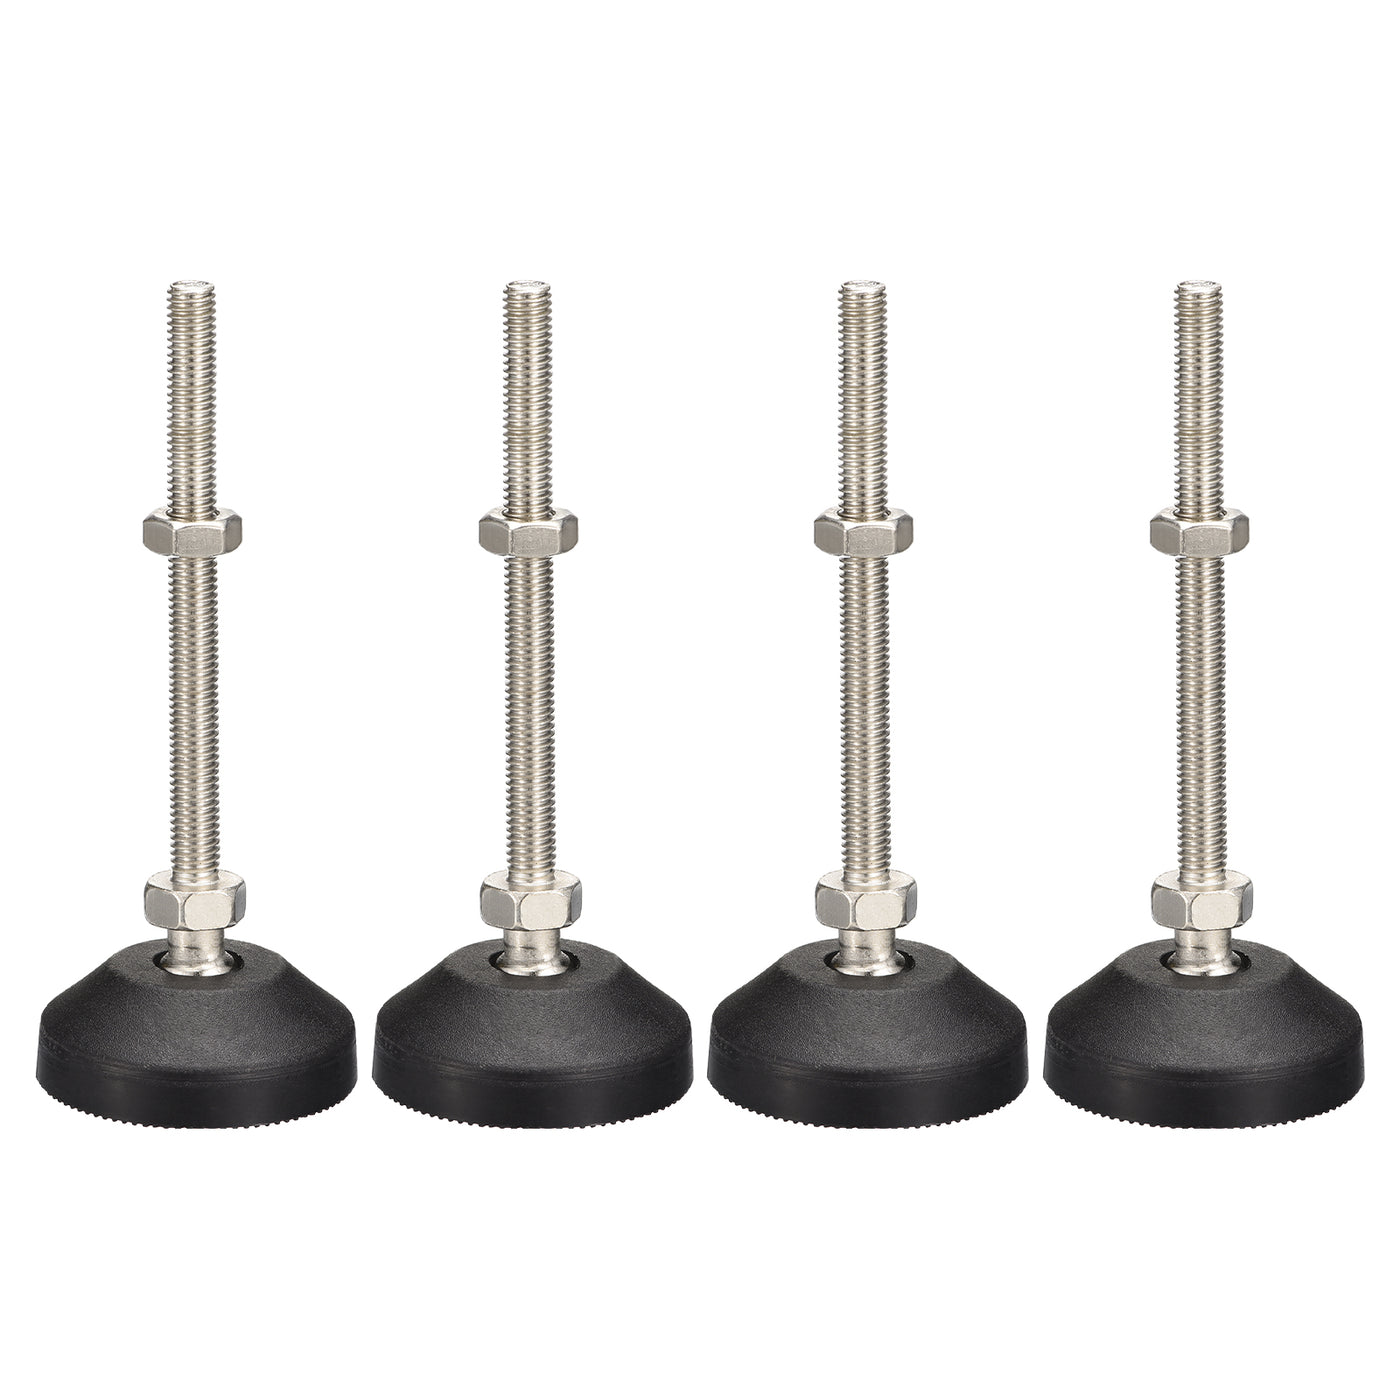 uxcell Uxcell Furniture Levelers, 4Pcs M8x100x50mm Nylon Universal Leveling Feet, Adjustable Swivel Table Feet for Furniture Workshop Machines Machinery Equipment